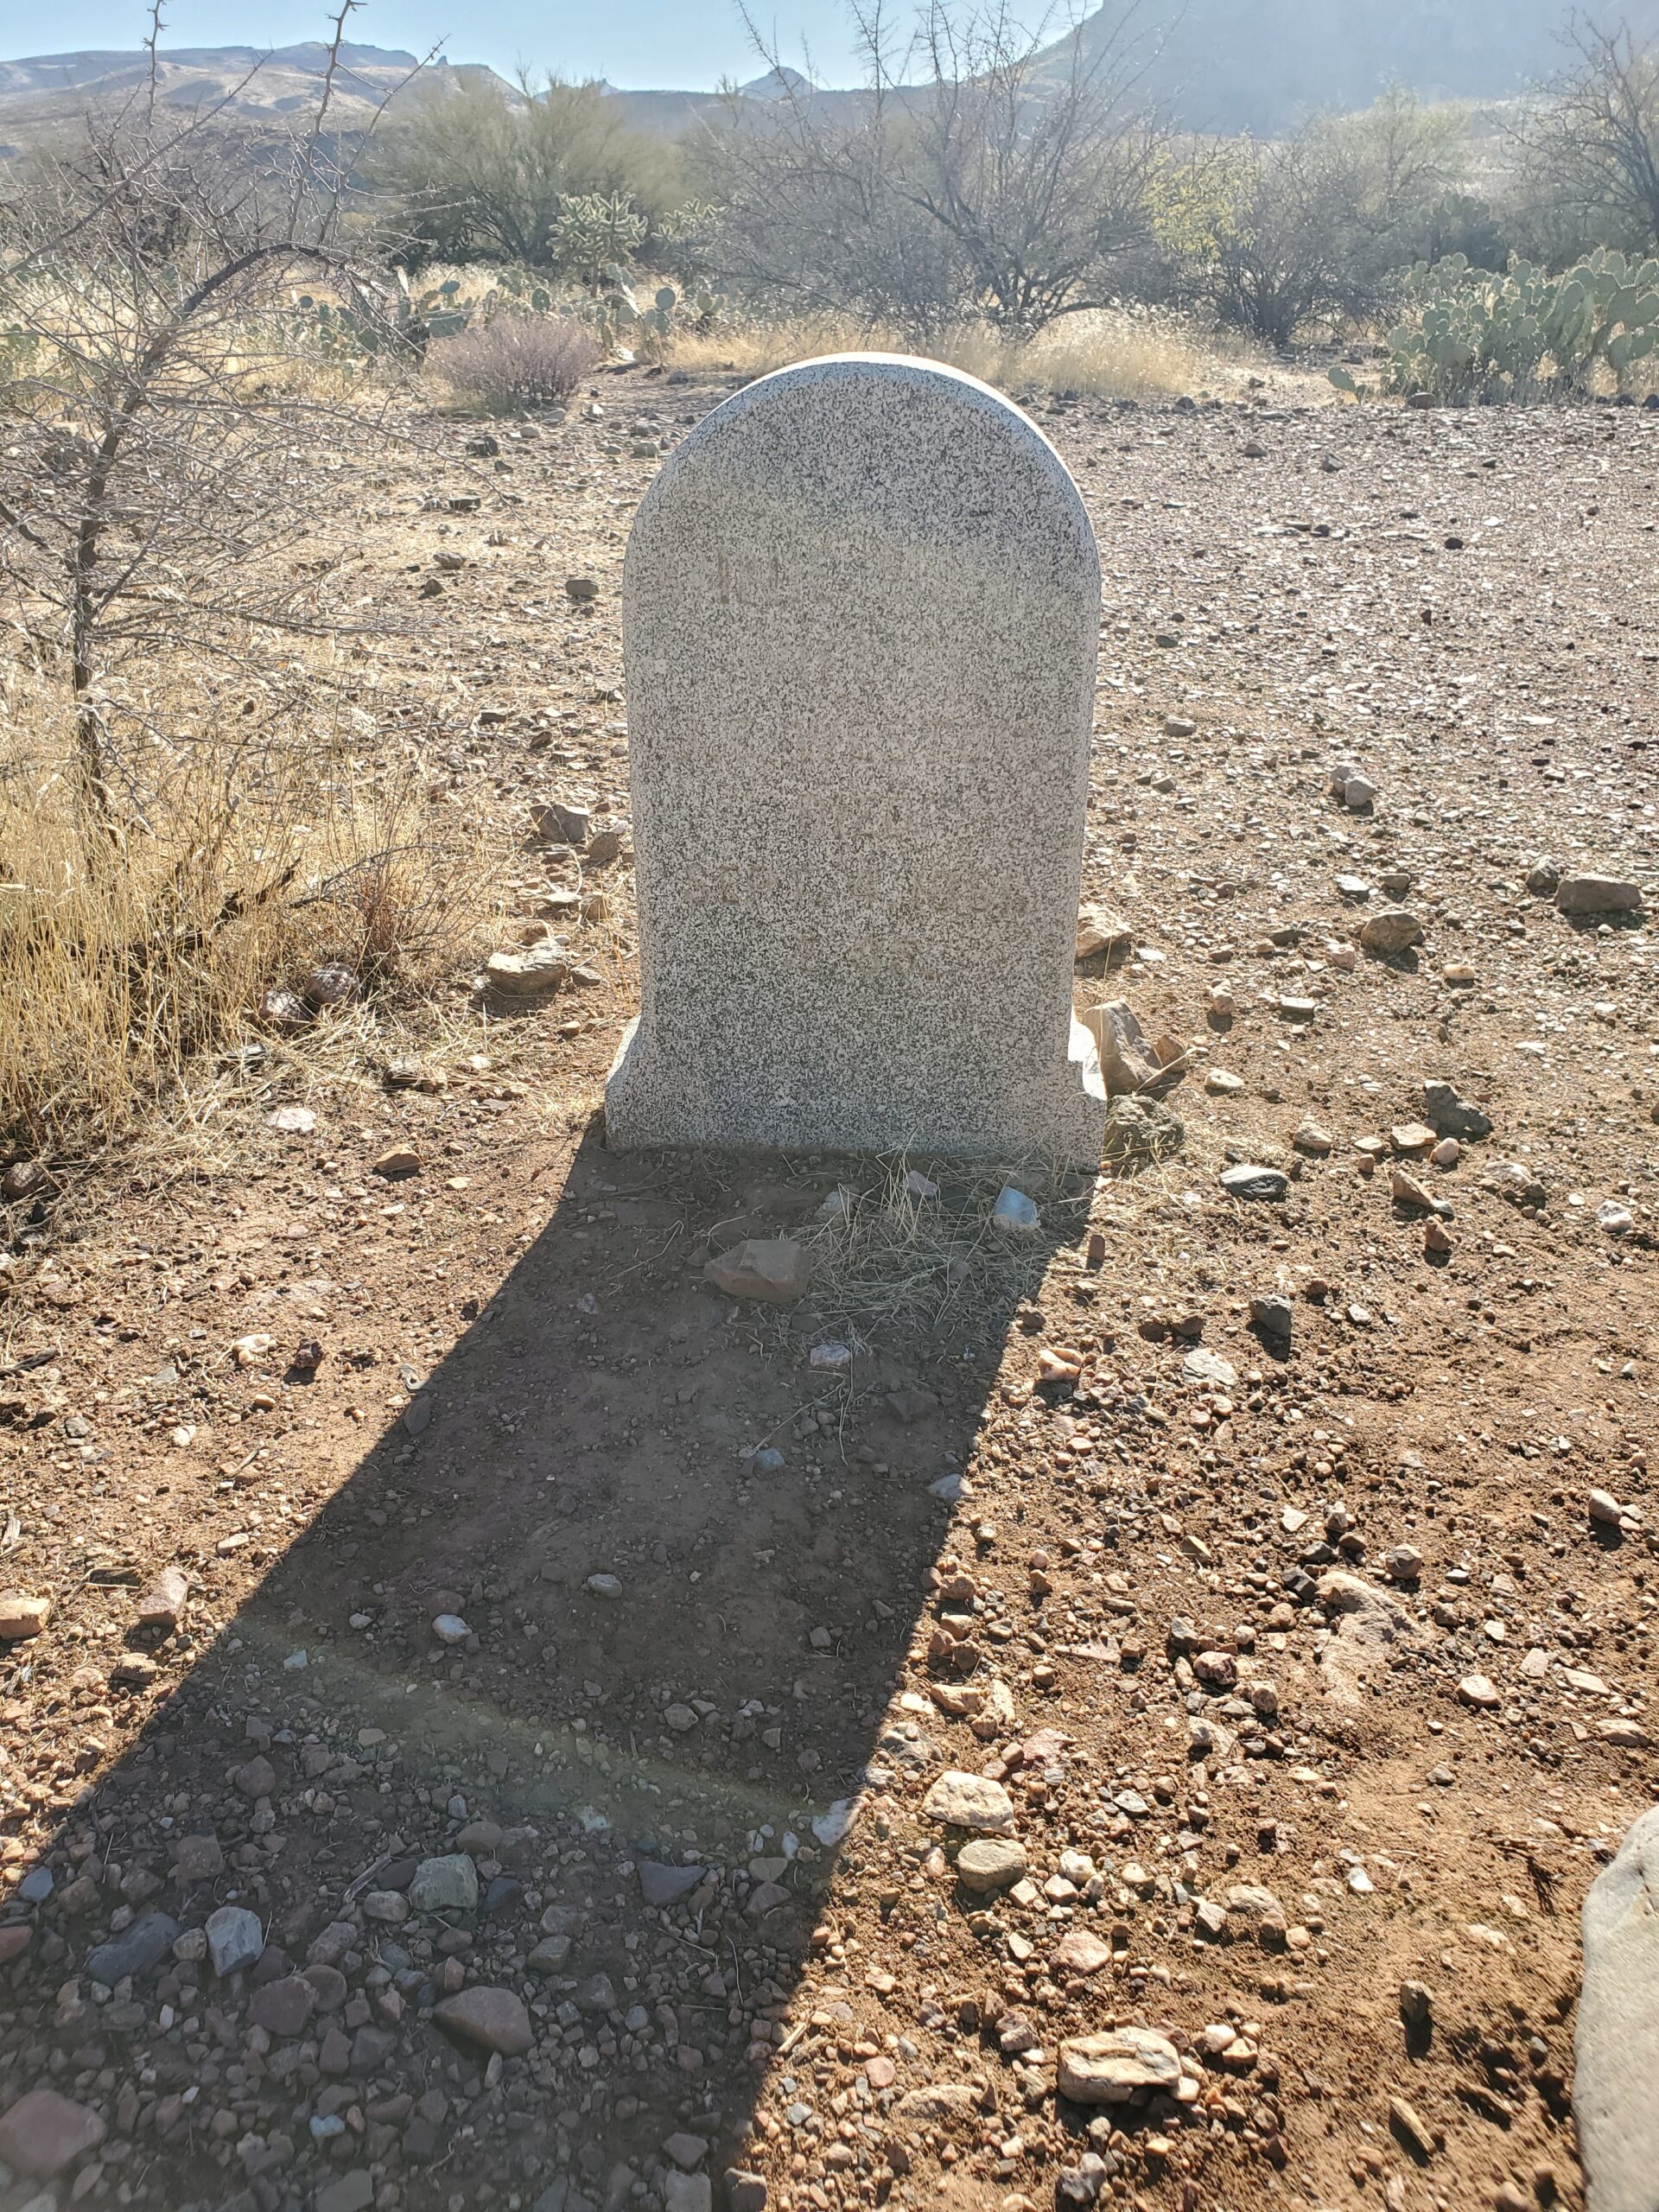 This marble grave marker is nearly impossible to read in the Arizona sun